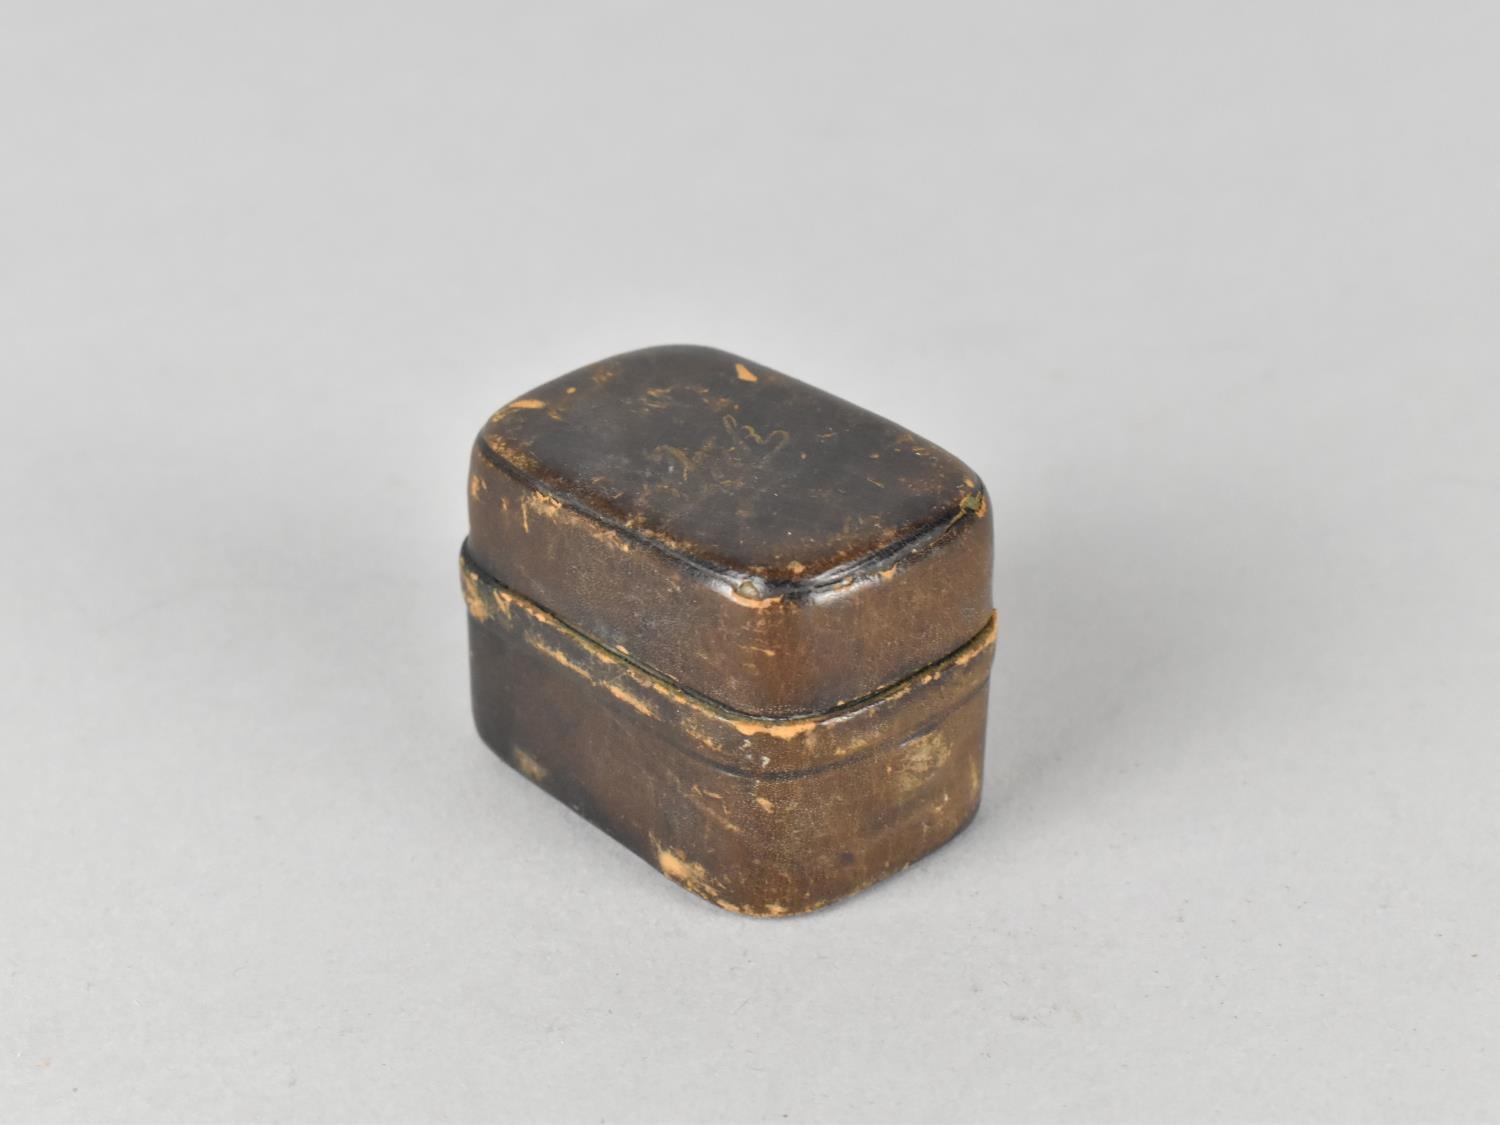 A Late 19th Century Traveling Inkwell with Leather Case, Hinged Lid Inscribed "Ink", 5cms Long - Image 3 of 3